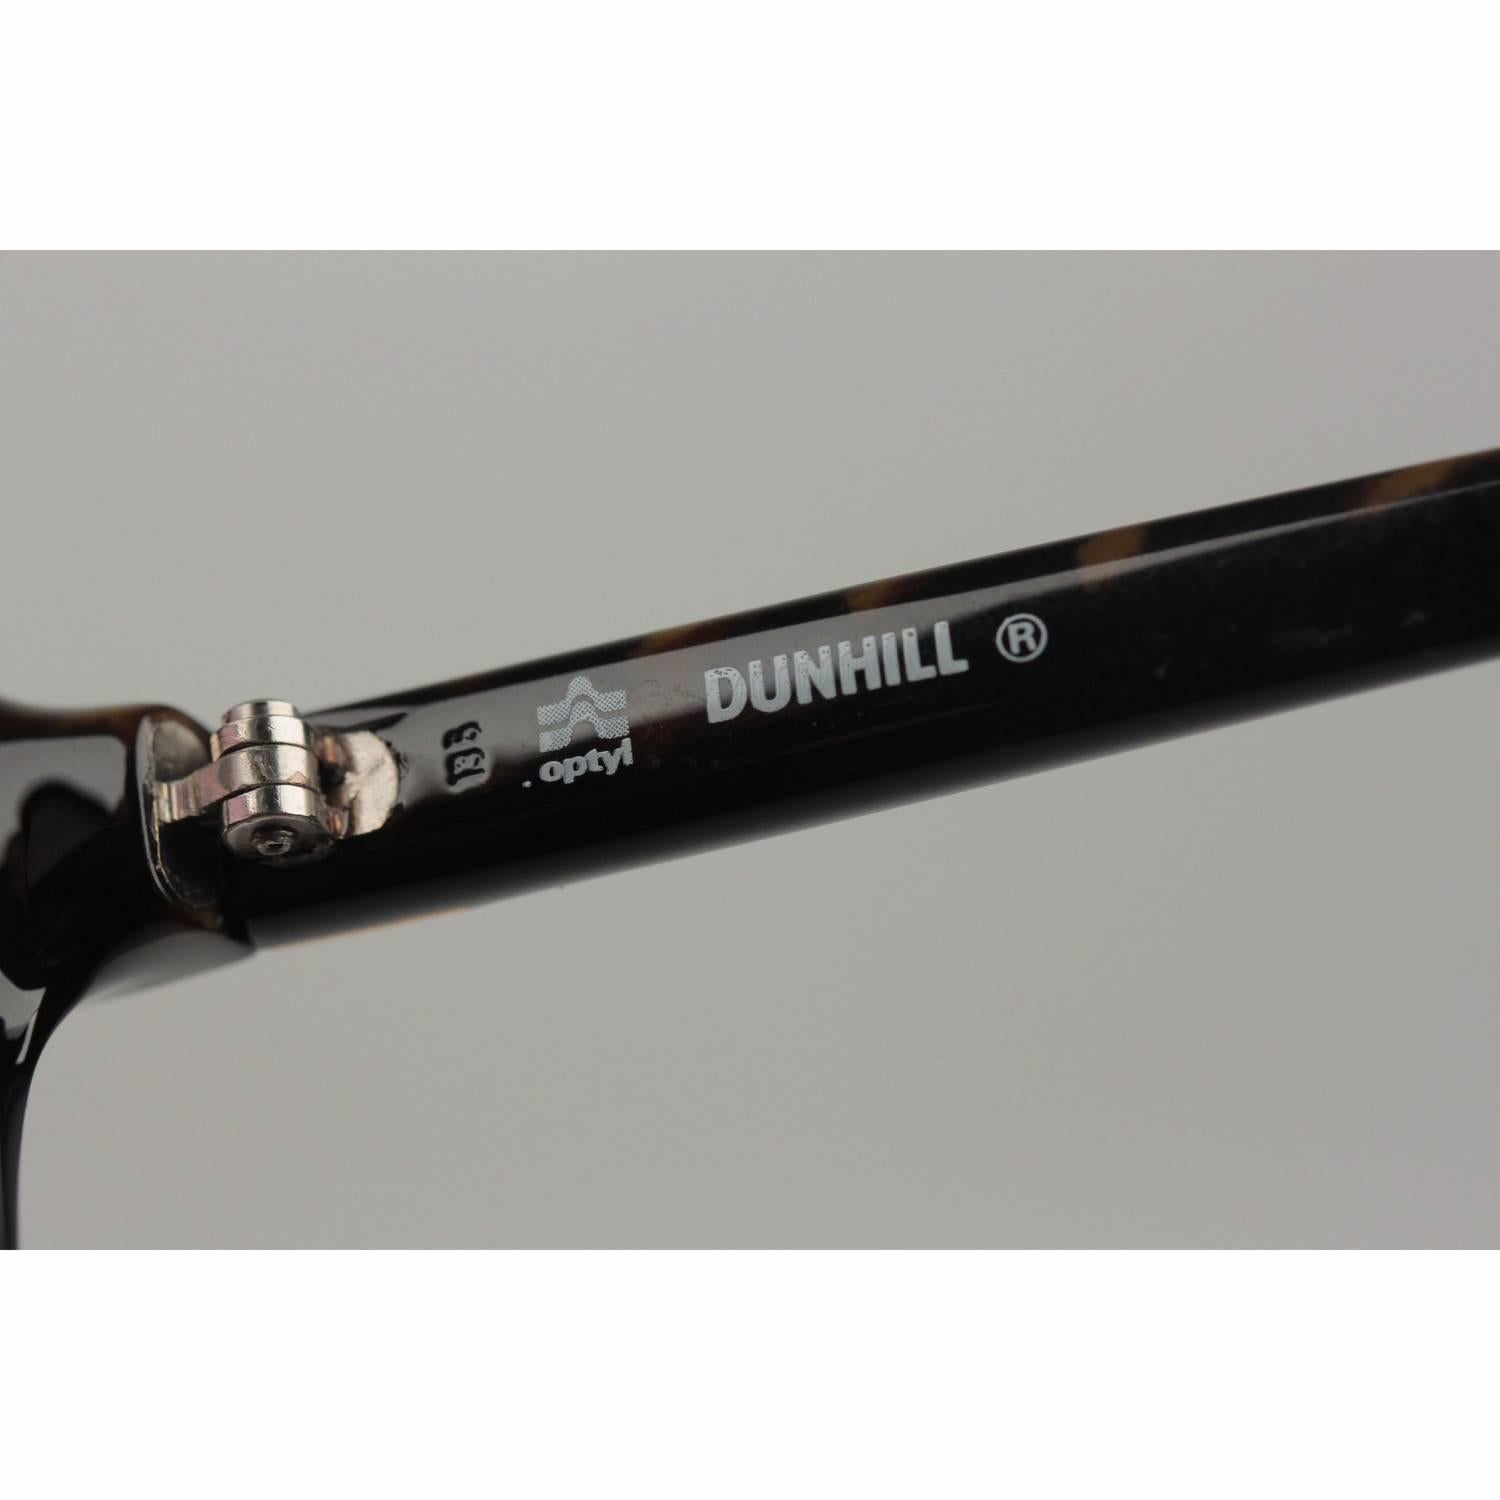 DUNHILL Vintage Brown Sunglasses 6024 OPTYL 58-18mm 140 New Old Stock 2